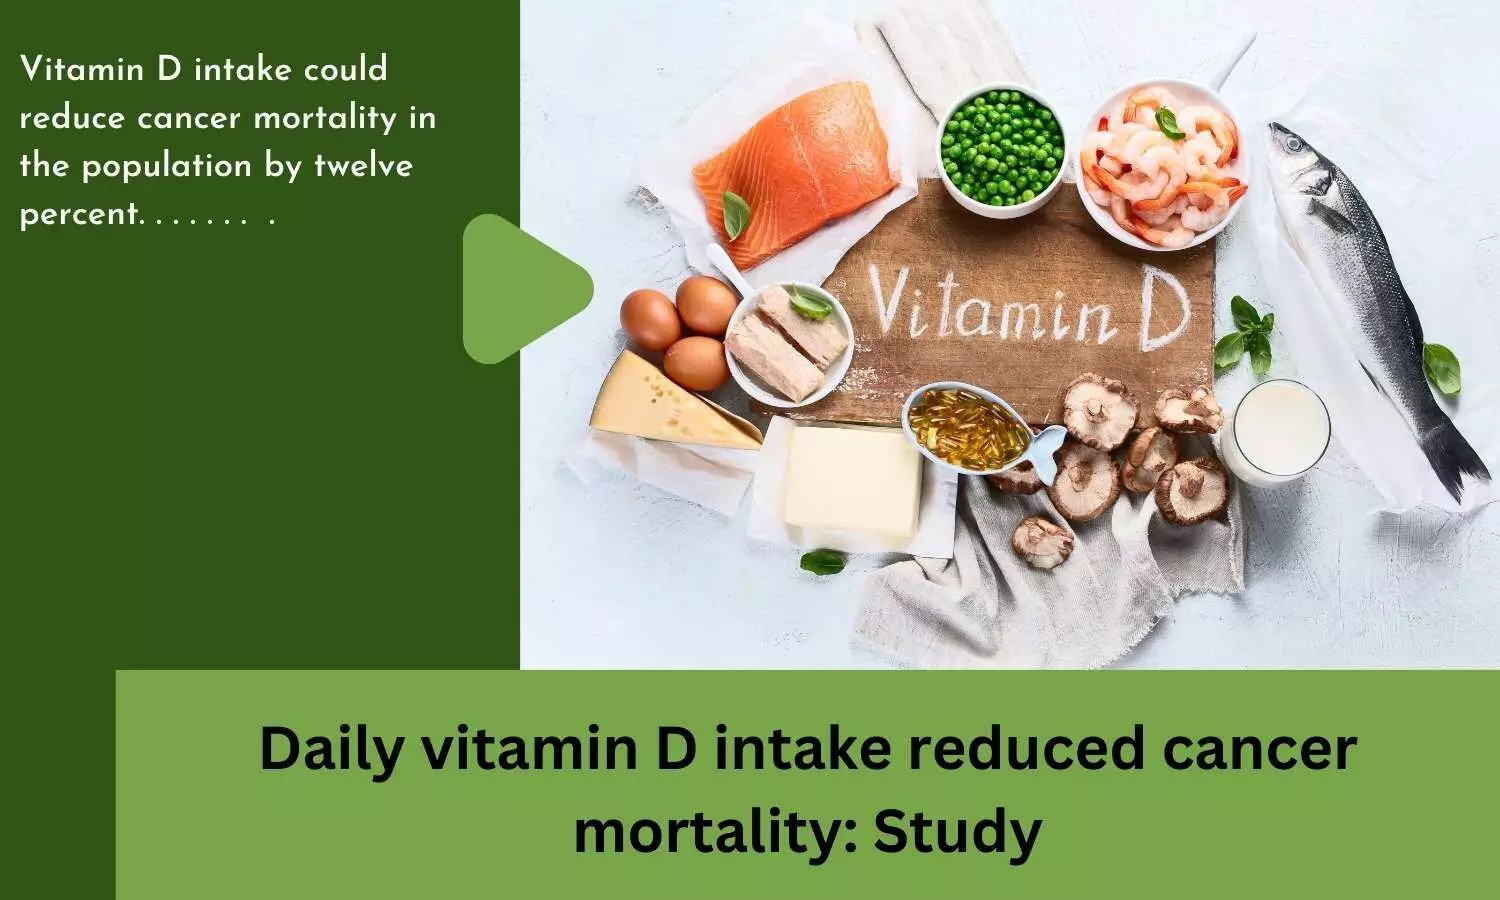 Daily vitamin D intake reduced cancer mortality: Study